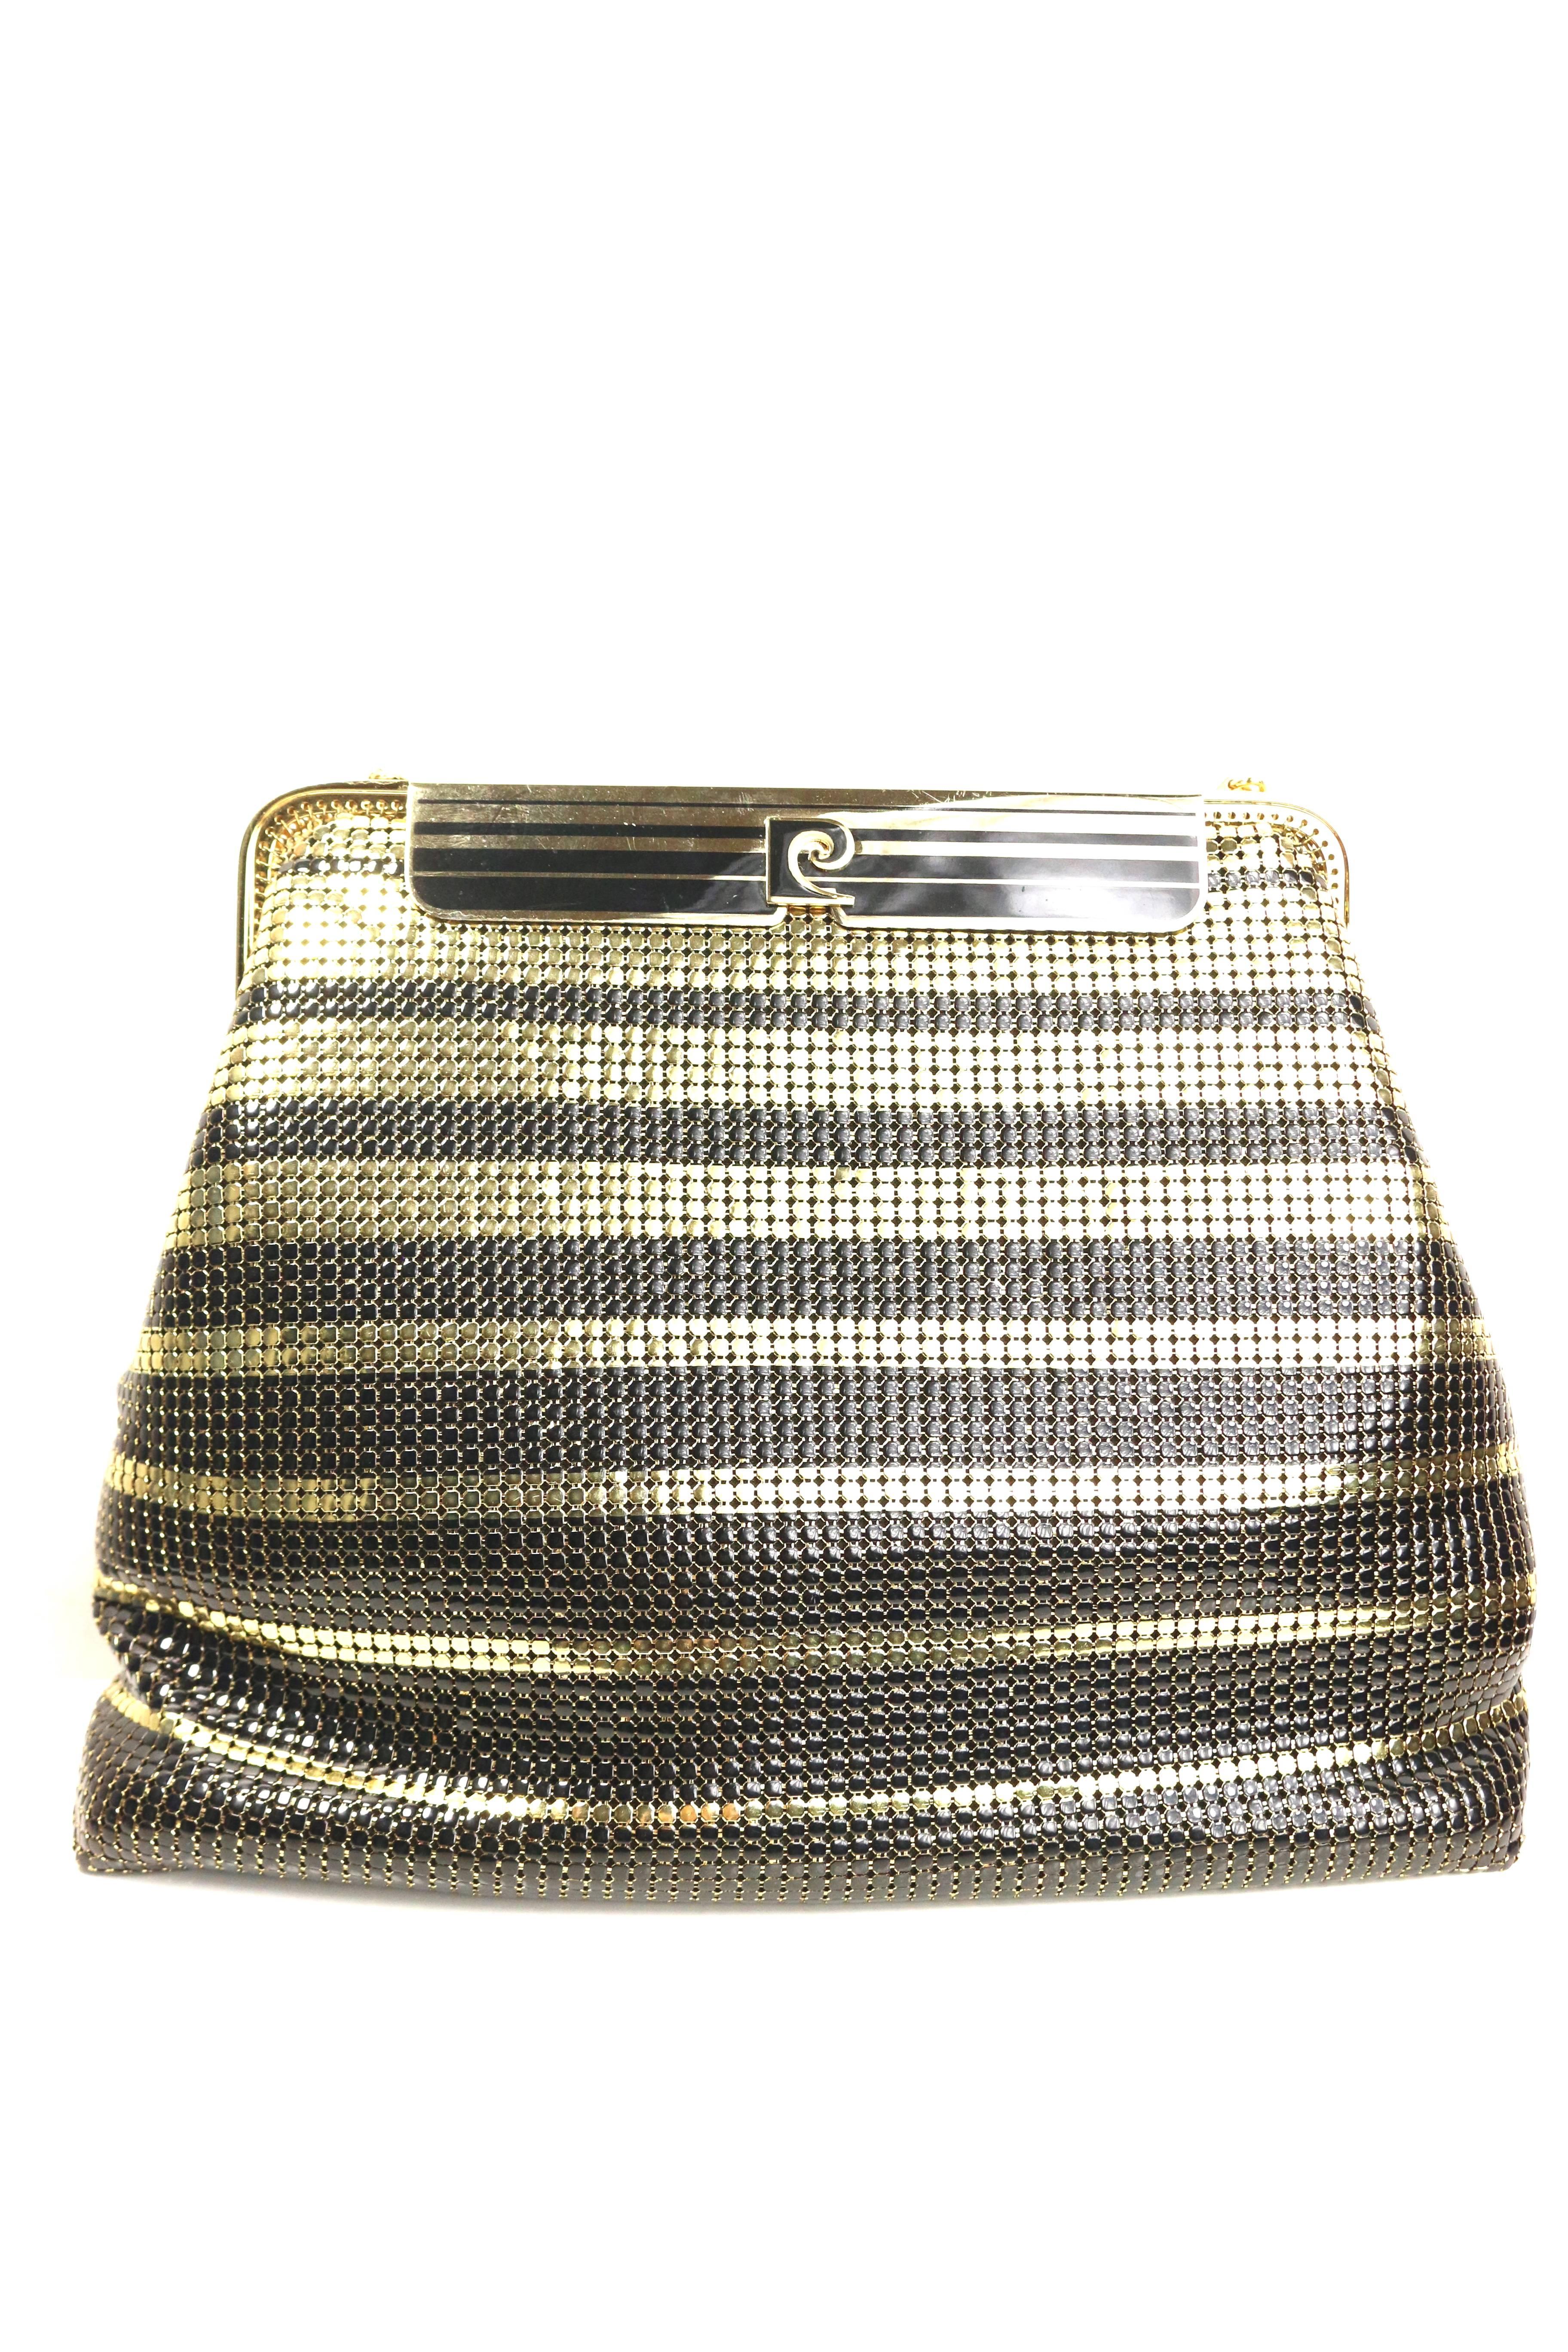 - One of a kind vintage 80s Pierre Cardin black and gold plated stripe sequins shoulder bag/clutch. 

- Gold plated with logo flap closure. 

- Gold plated shoulder strap. 

- Two interior satin open pocket. 

- Height: 7 inches. Length: 9 inches.